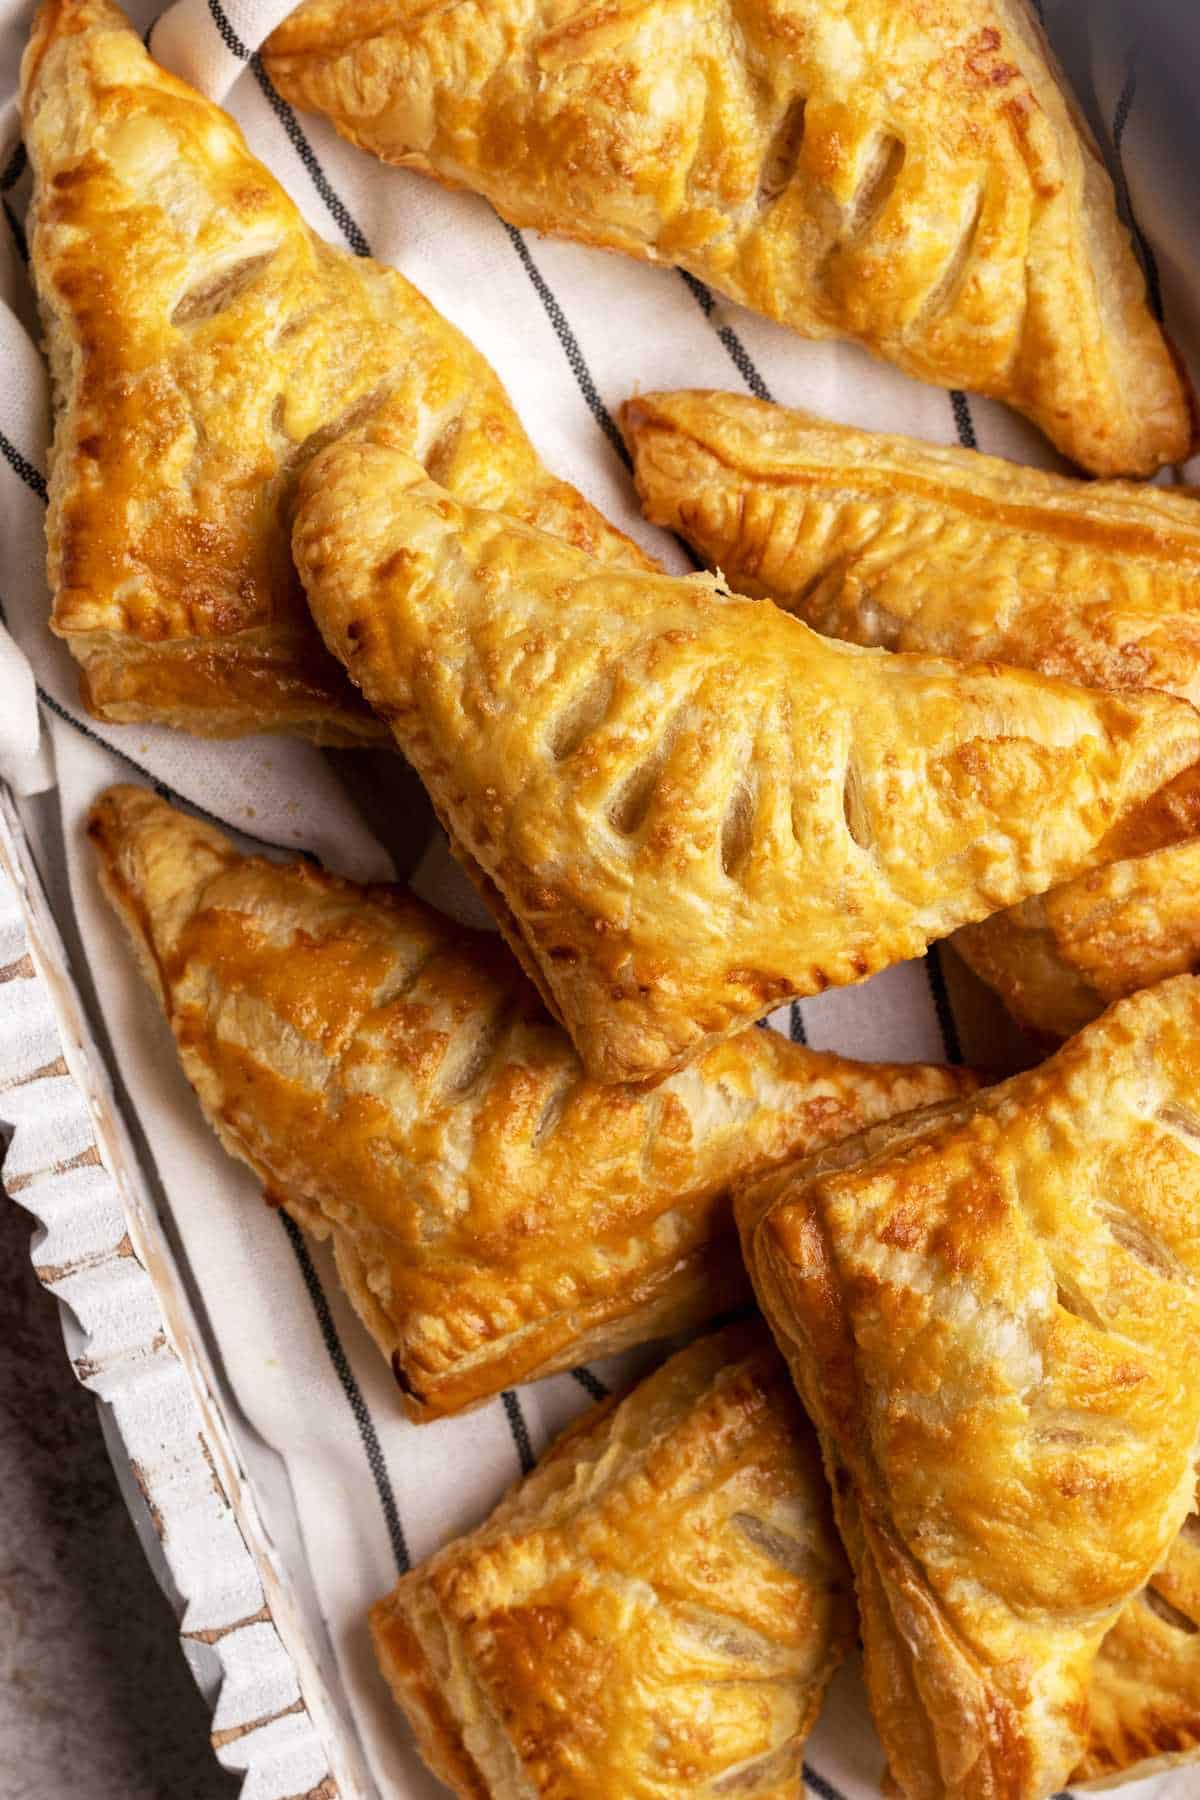 Apple turnovers in a serving tray.